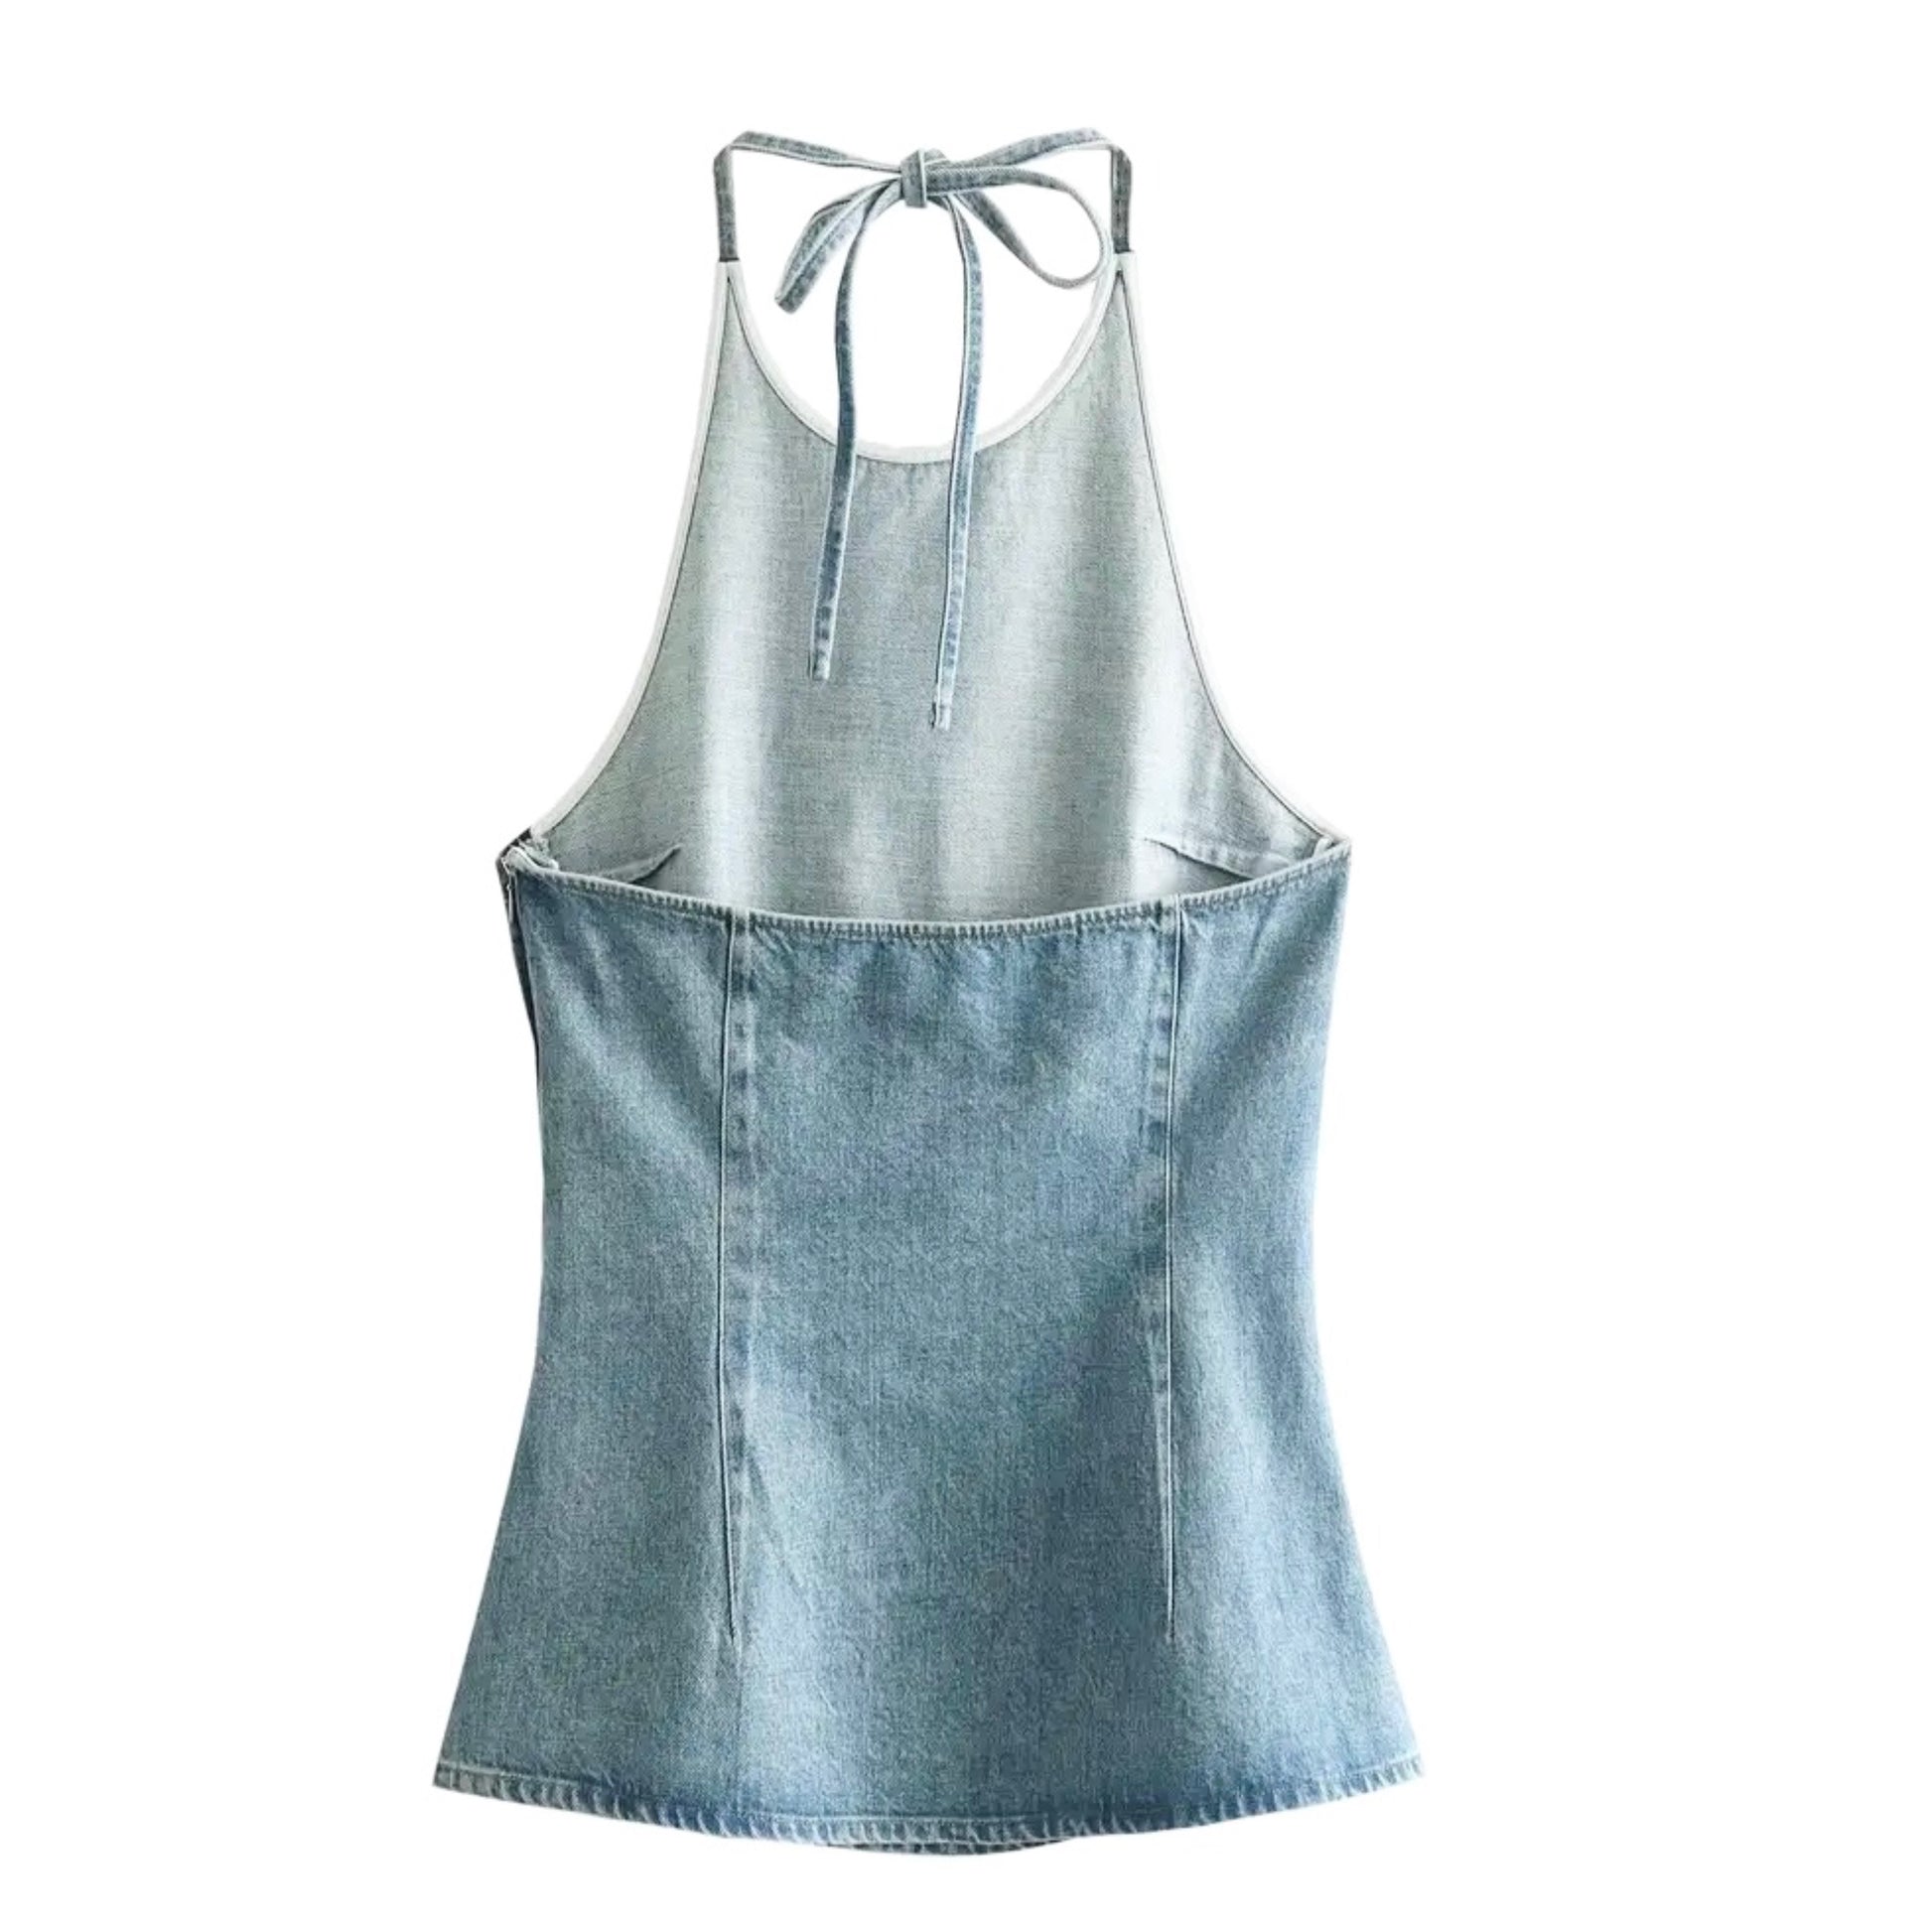 light-blue-bleach-wash-faded-distressed-vintage-retro-slim-fit-bodycon-corset-cinched-waist-sleeveless-spaghetti-strap-round-neckline-backless-open-back-halter-denim-jean-full-length-hip-camisole-tank-top-blouse-shirt-women-ladies-teens-tweens-chic-trendy-spring-2024-summer-casual-feminine-western-y2k-cocktail-party-sexy-date-night-out-club-wear-90s-minimalist-minimalism-office-siren-stockholm-style-zara-revolve-aritzia-reformation-dupe